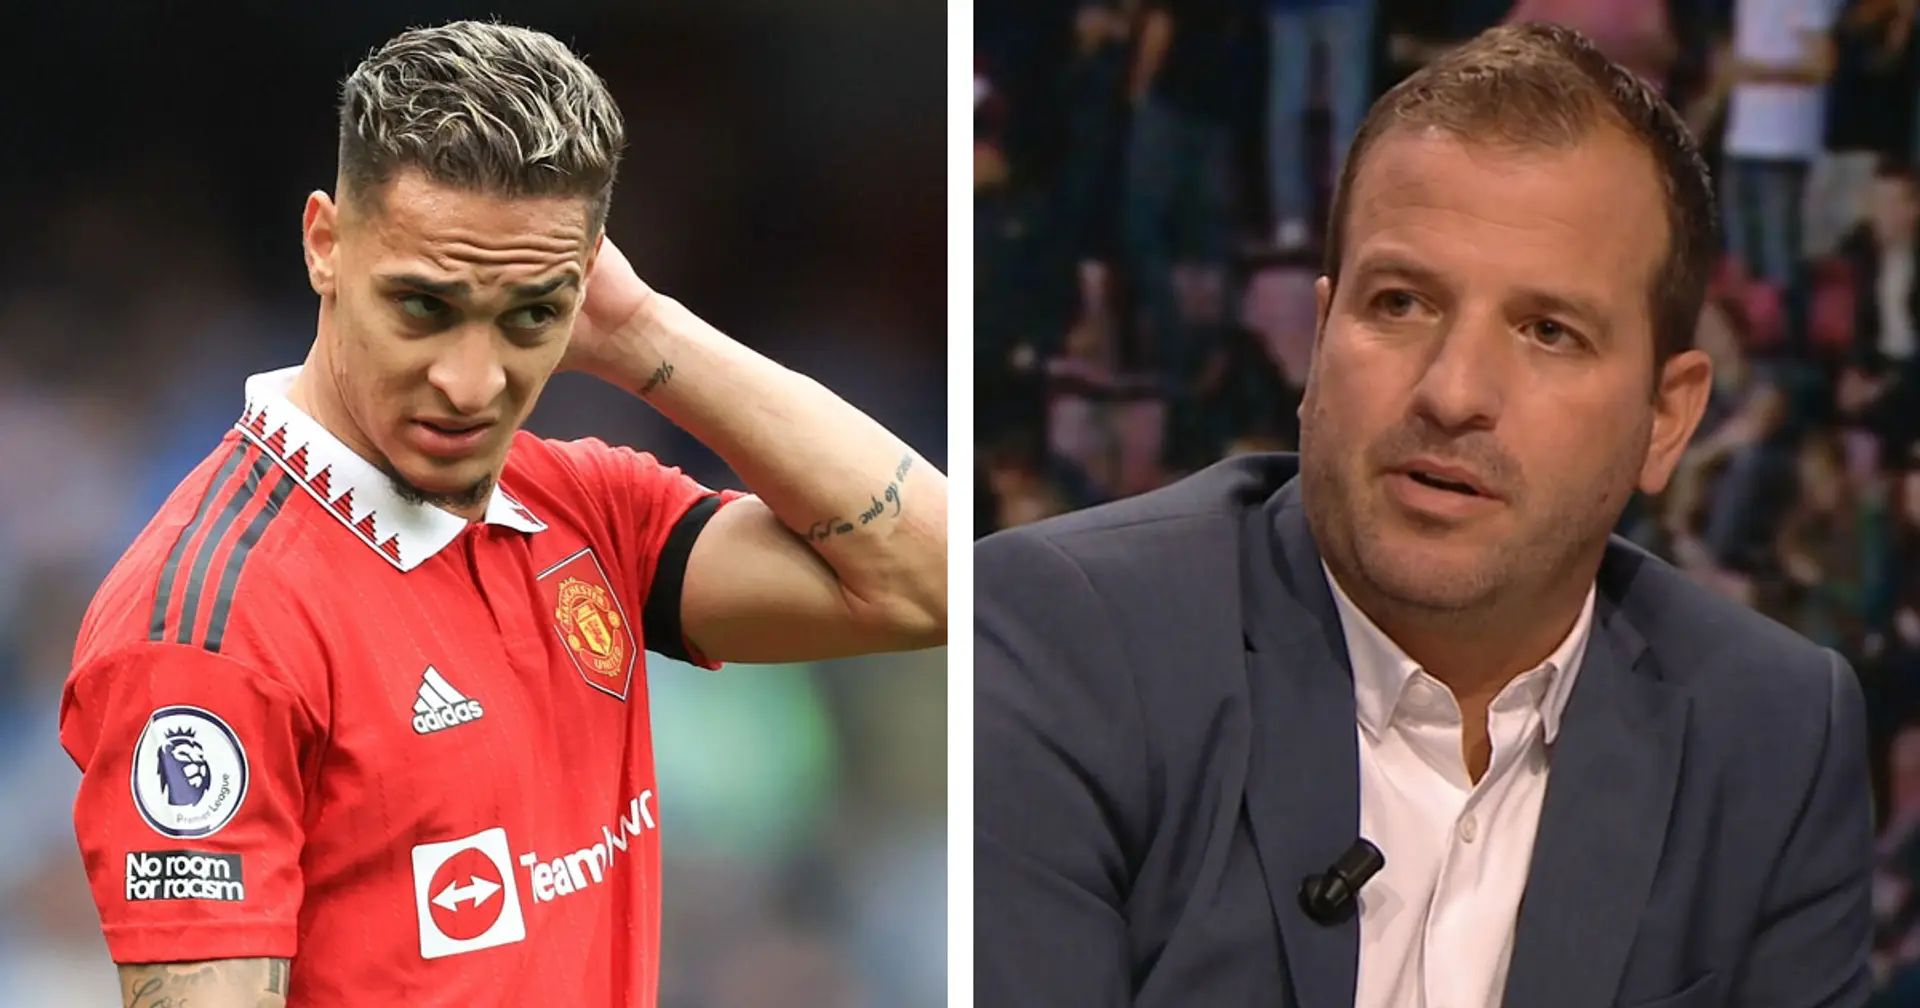 'That would annoy the hell out of me': Van der Vaart reveals Antony's antics that frustrated him in Man City loss